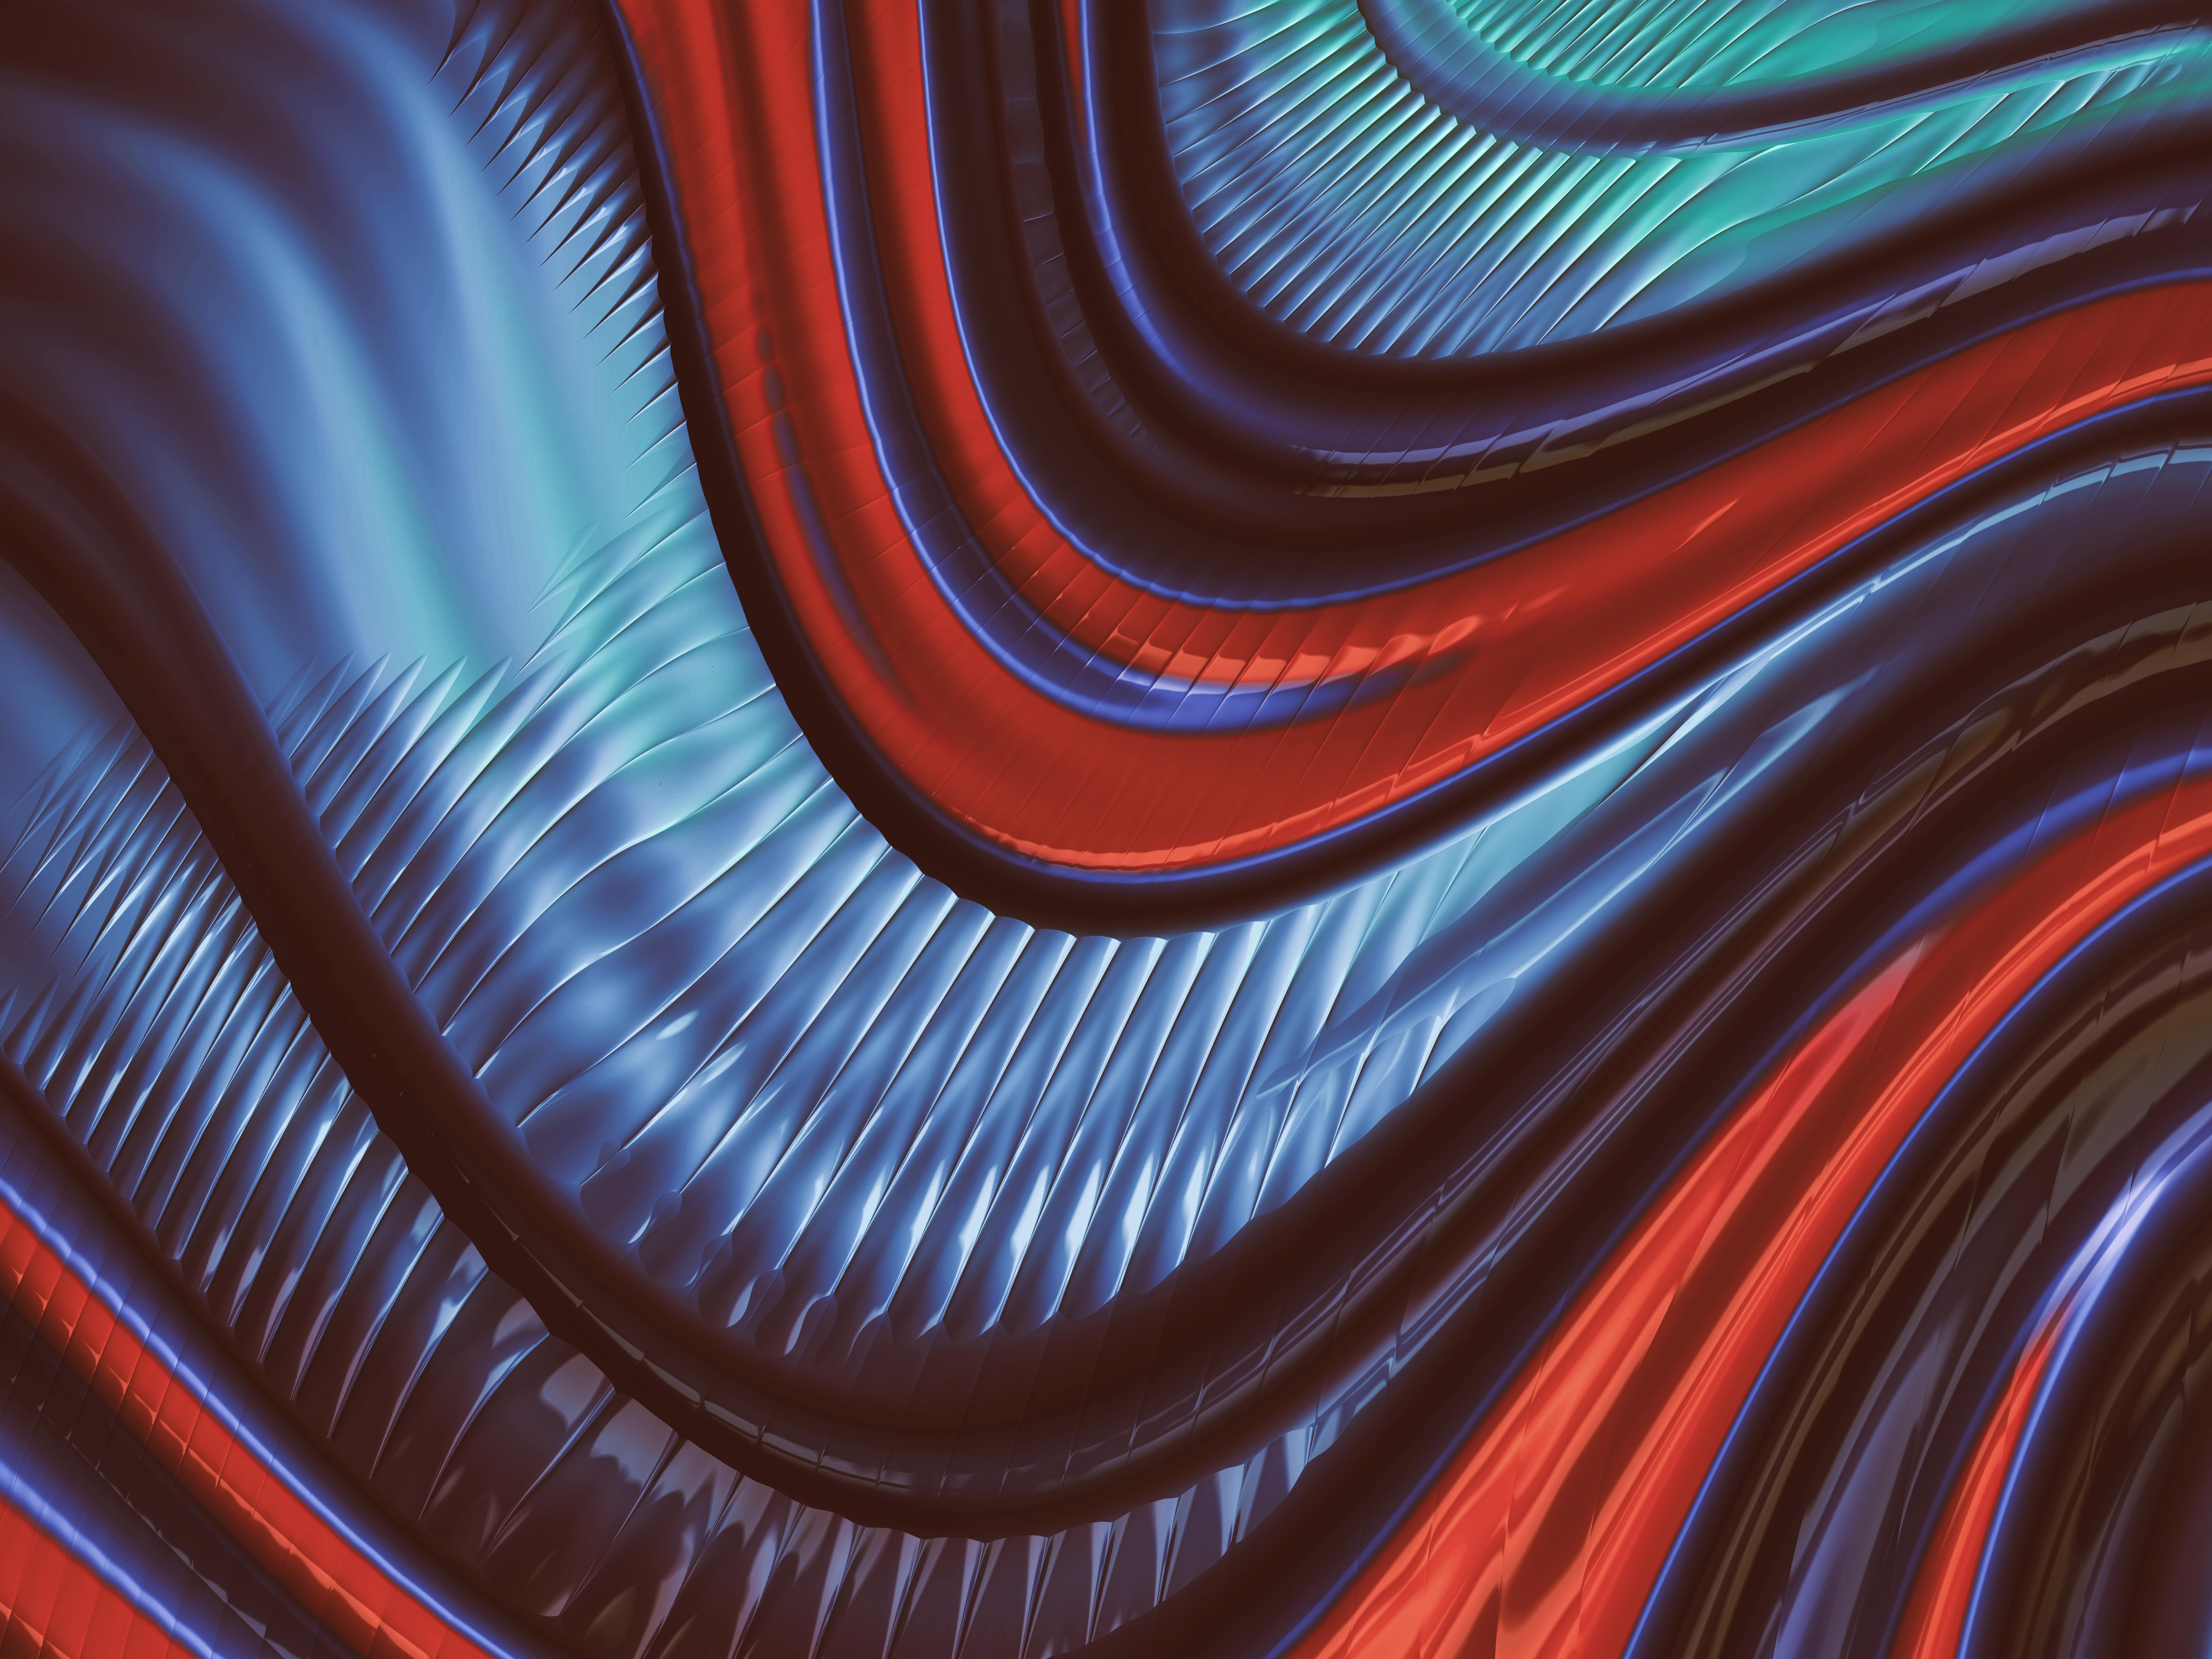 Stunning 4k Abstract Wallpaper In Blue And Red With 3d Illustration  Background, 3d Wallpaper, Wallpaper Design, 3d Pattern Background Image And  Wallpaper for Free Download